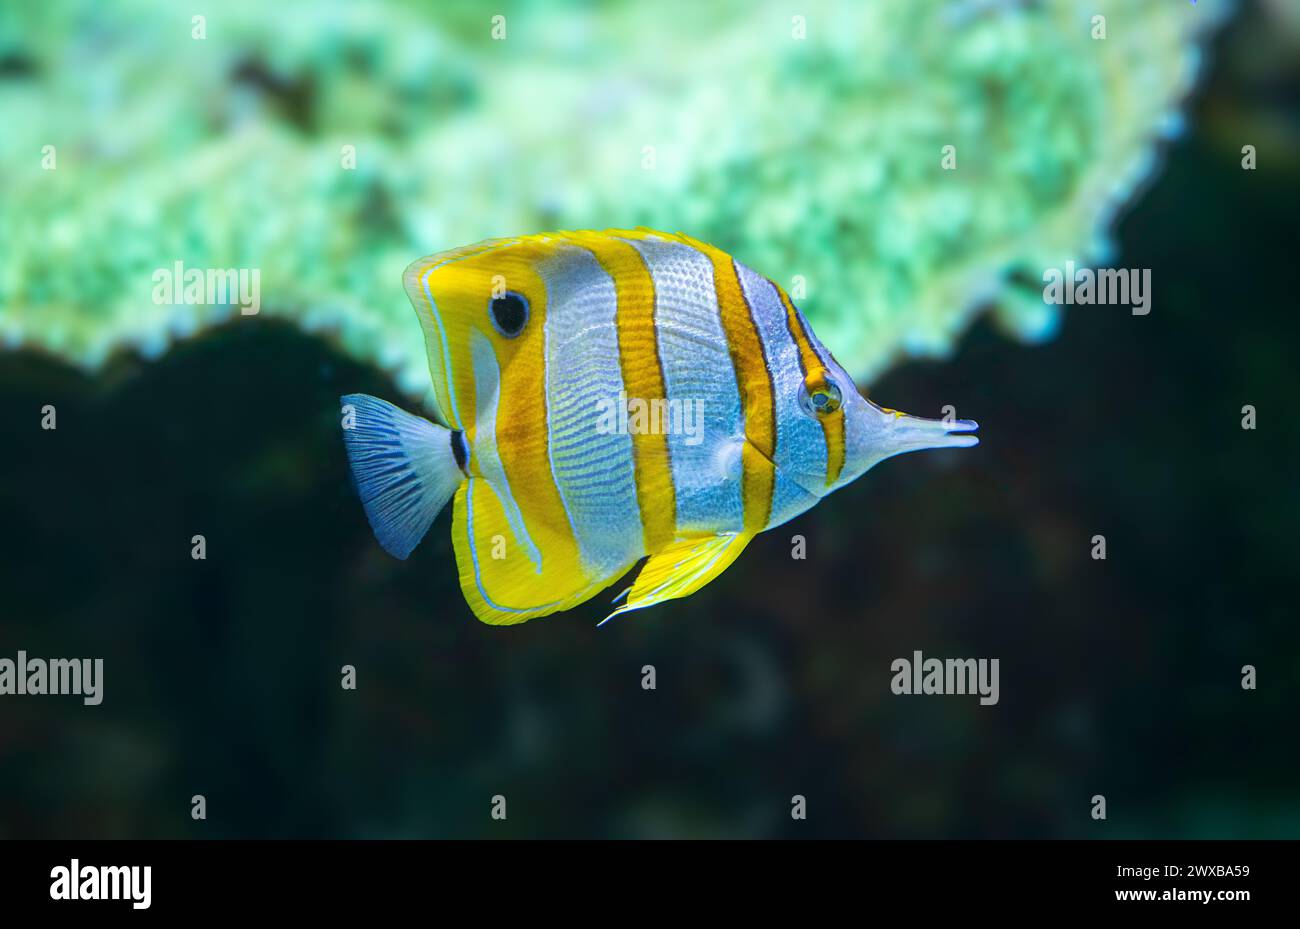 The copperband butterflyfish (Chelmon rostratus), also known as the beaked coral fish, is found in reefs in both the Pacific and Indian Oceans. Stock Photo